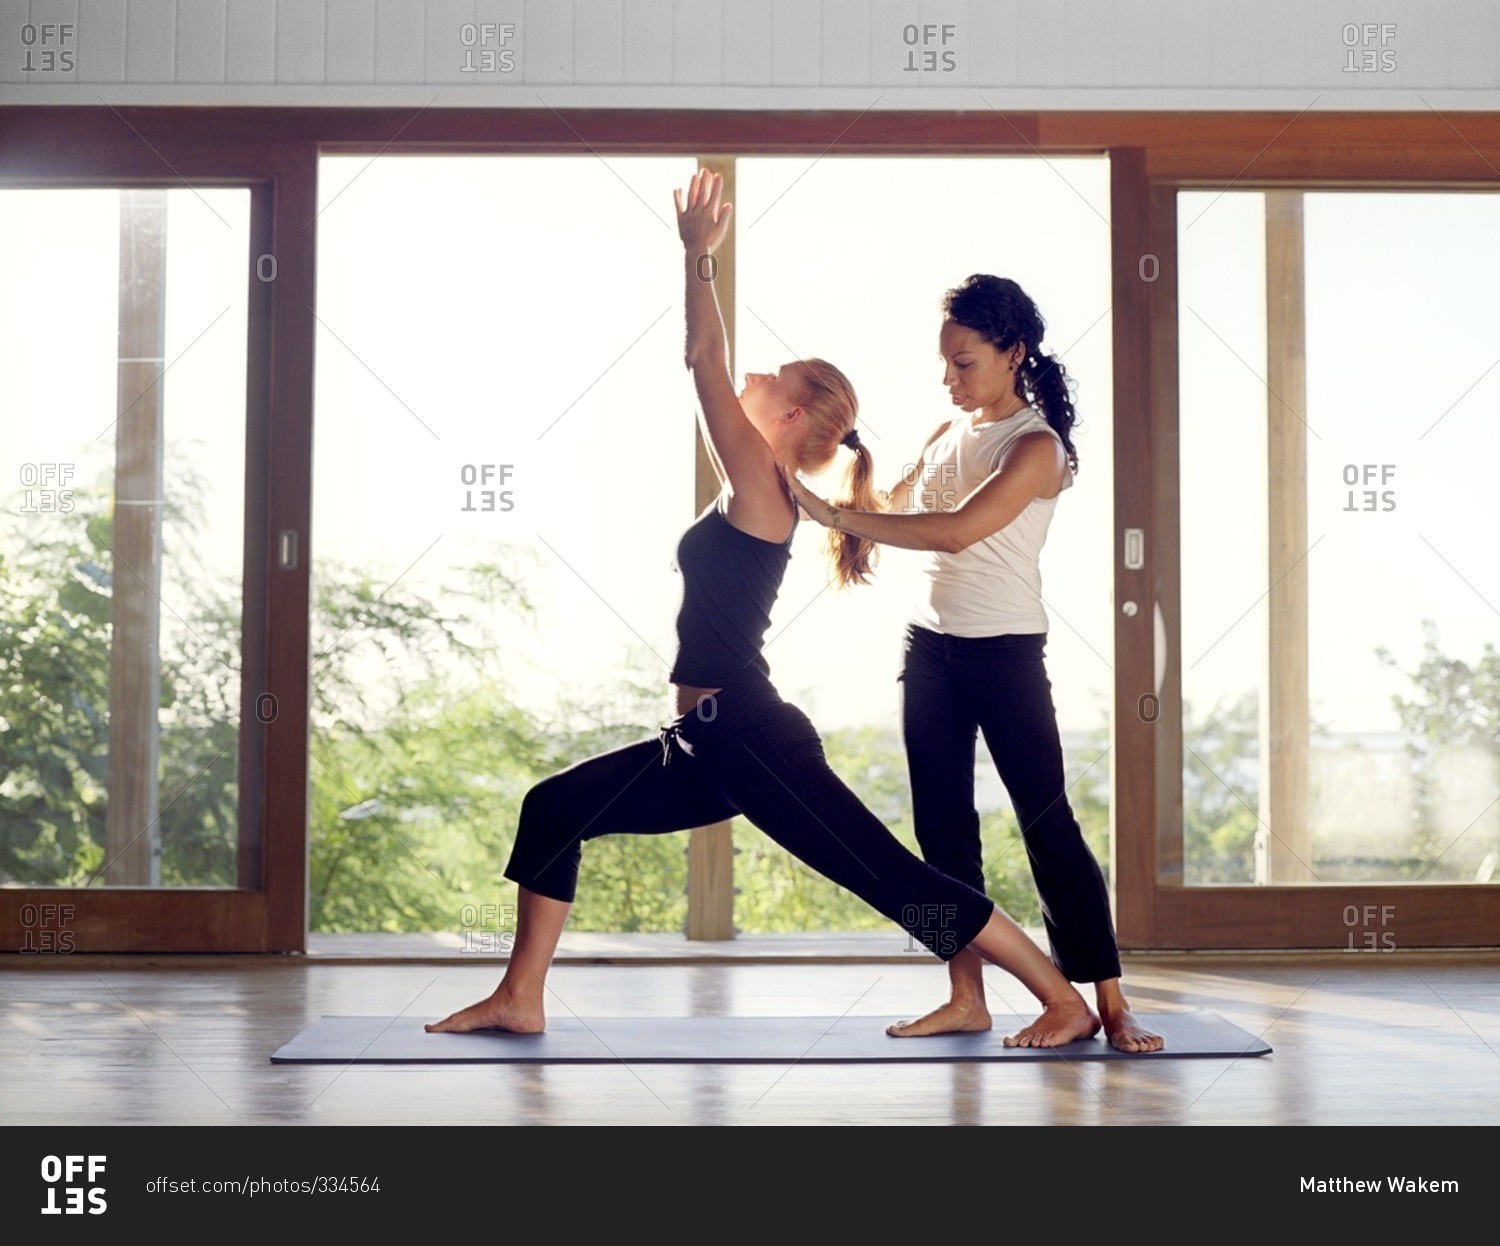 Yoga instructor helping a student with warrior pose during a yoga class